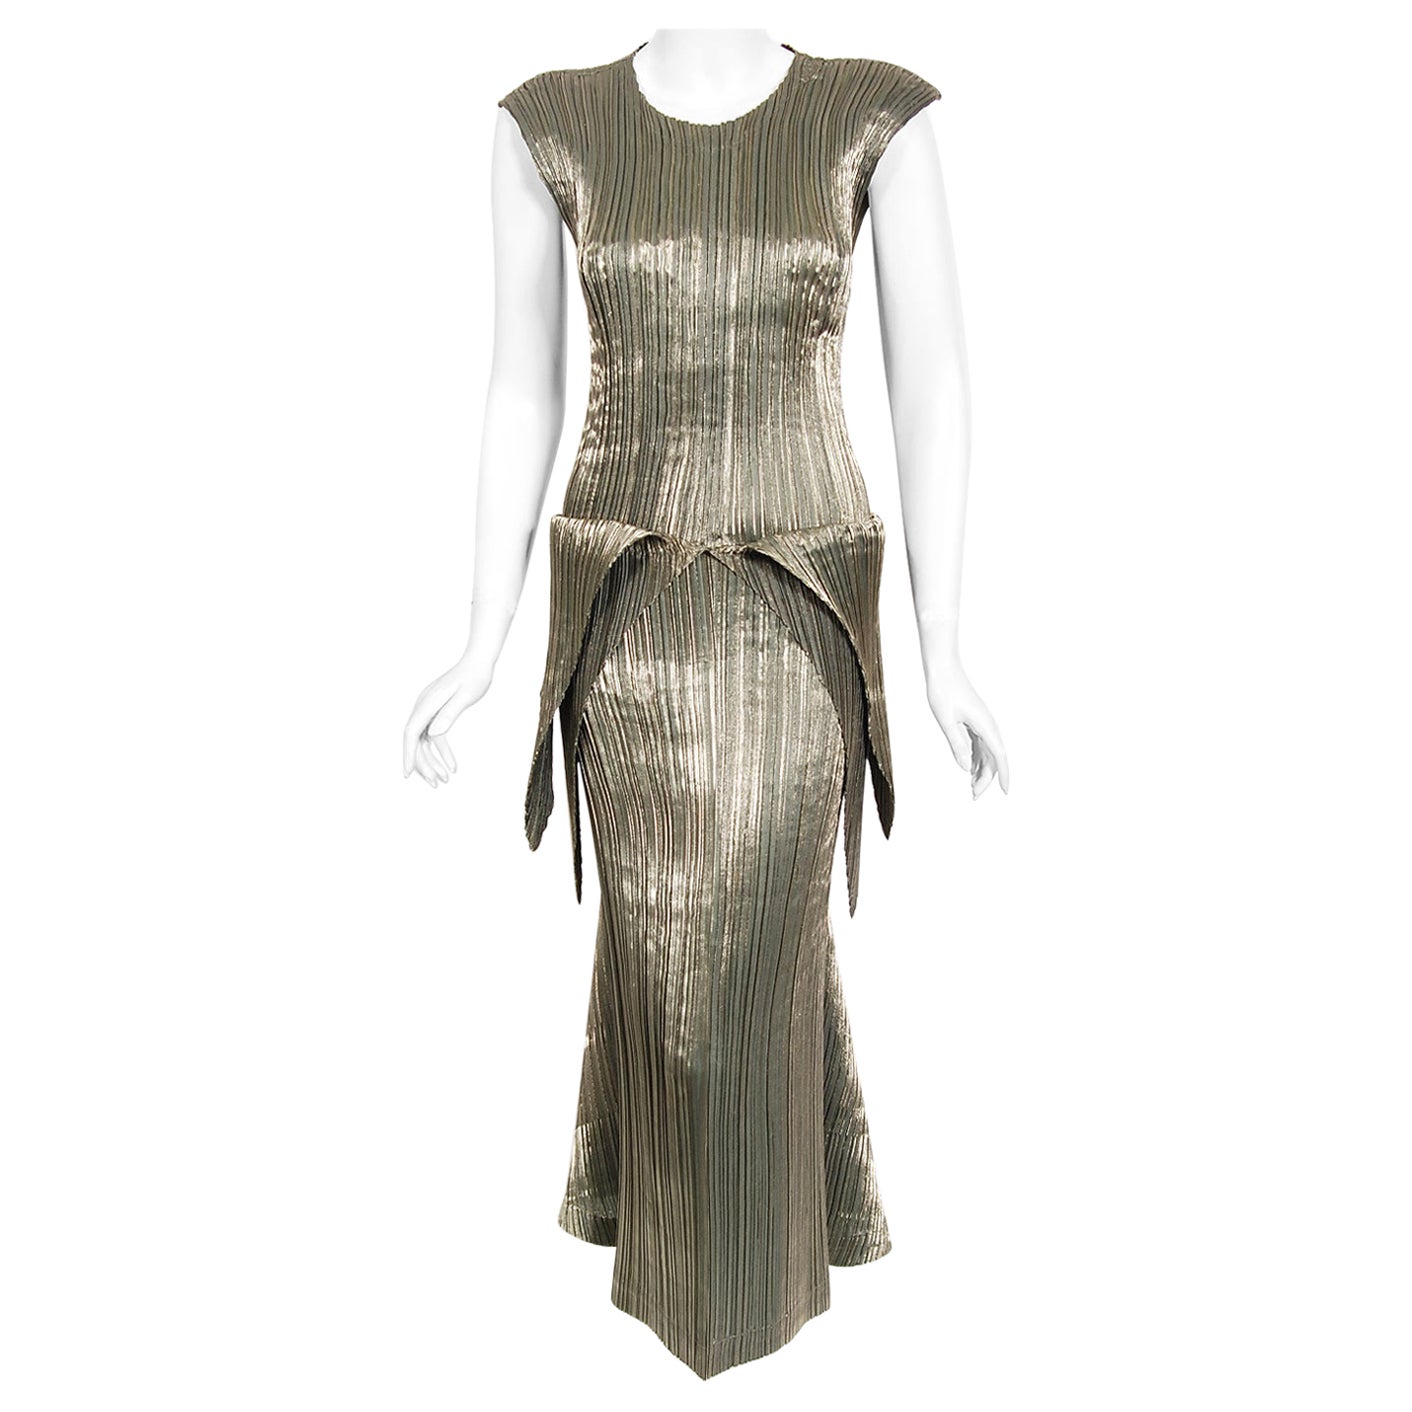 Vintage 1989 Issey Miyake Documented Metallic Gold Pleated Origami Tails Dress